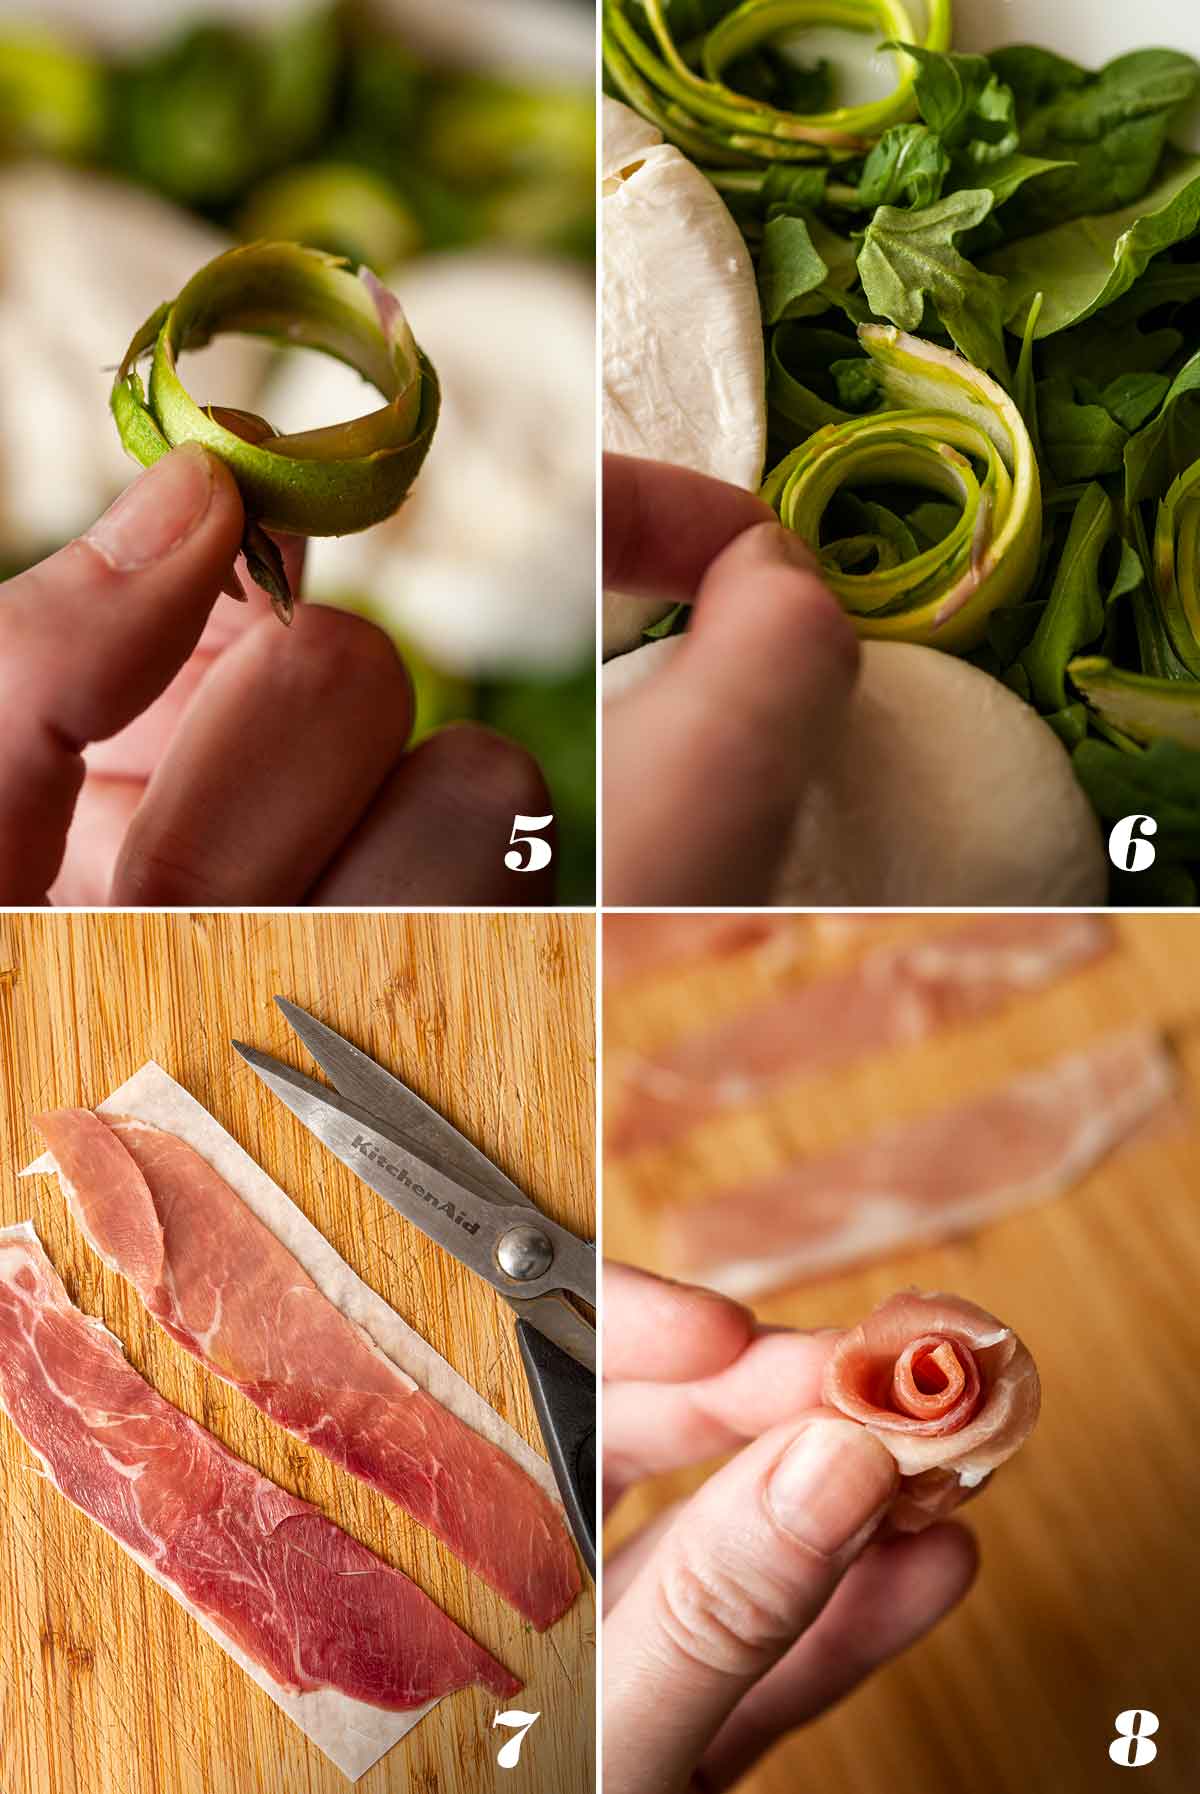 A collage of 4 numbered images showing how to prep ingredients for a salad.